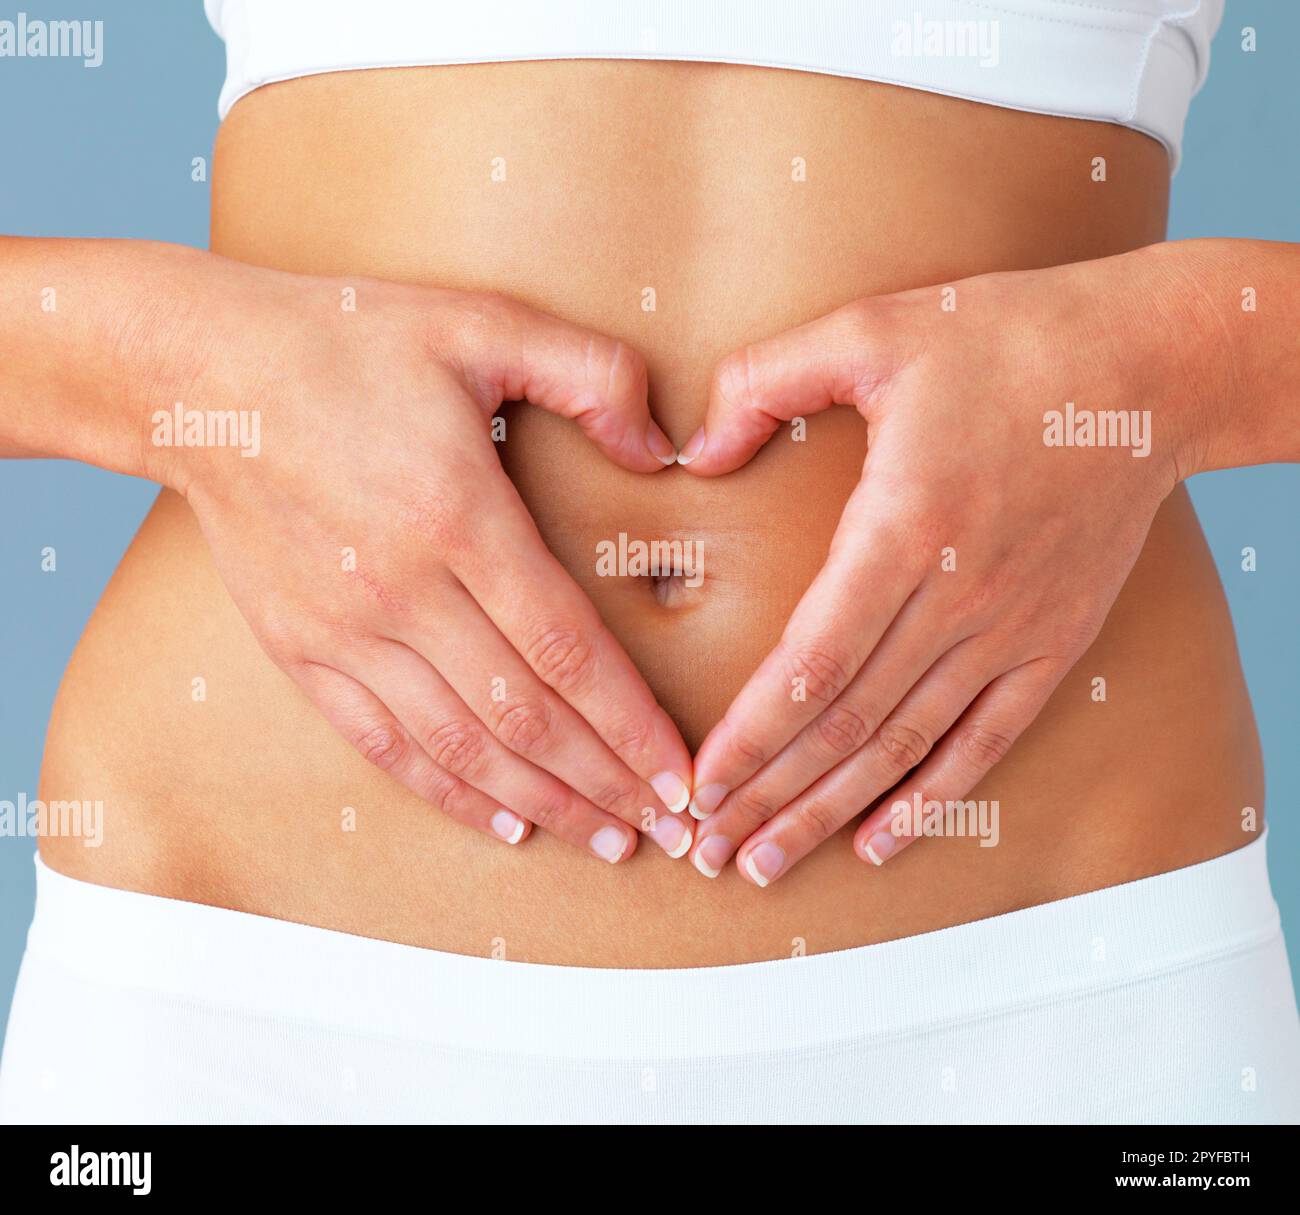 Healthy starts with the stomach. Cropped studio shot of a fit young woman making a heart shaped gesture over her stomach against a blue background. Stock Photo